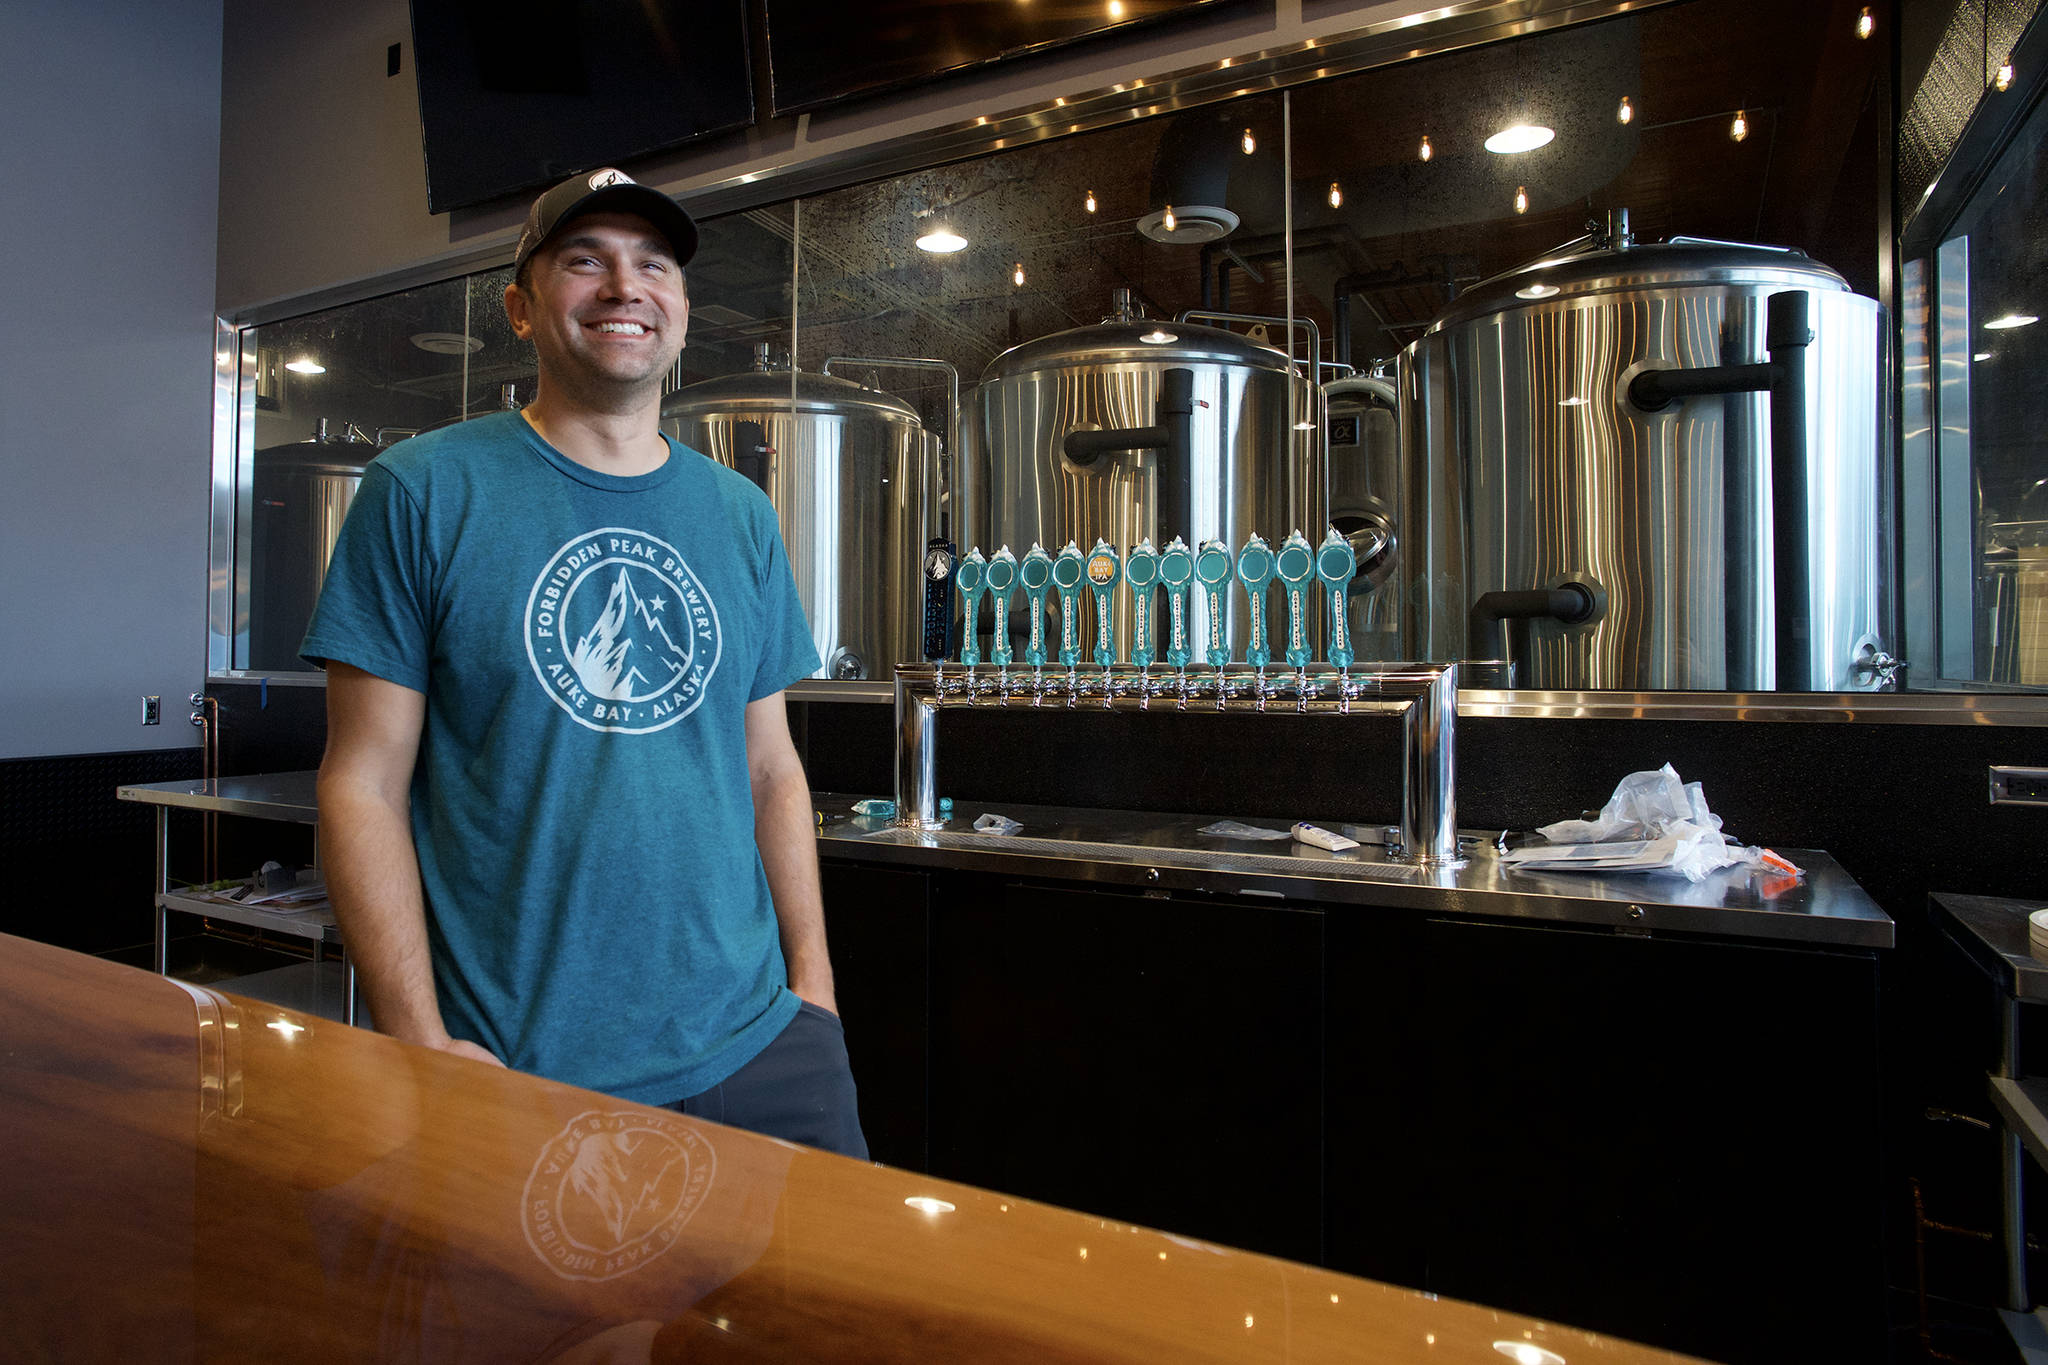 Co-owner Skye Stekoll stands behind a new bar as the Forbidden Peak Brewery nears completion on Thursday, Oct. 3, 2019. The Auke Bay brewery is to open Saturday, Oct. 12. (Michael Penn | Juneau Empire)